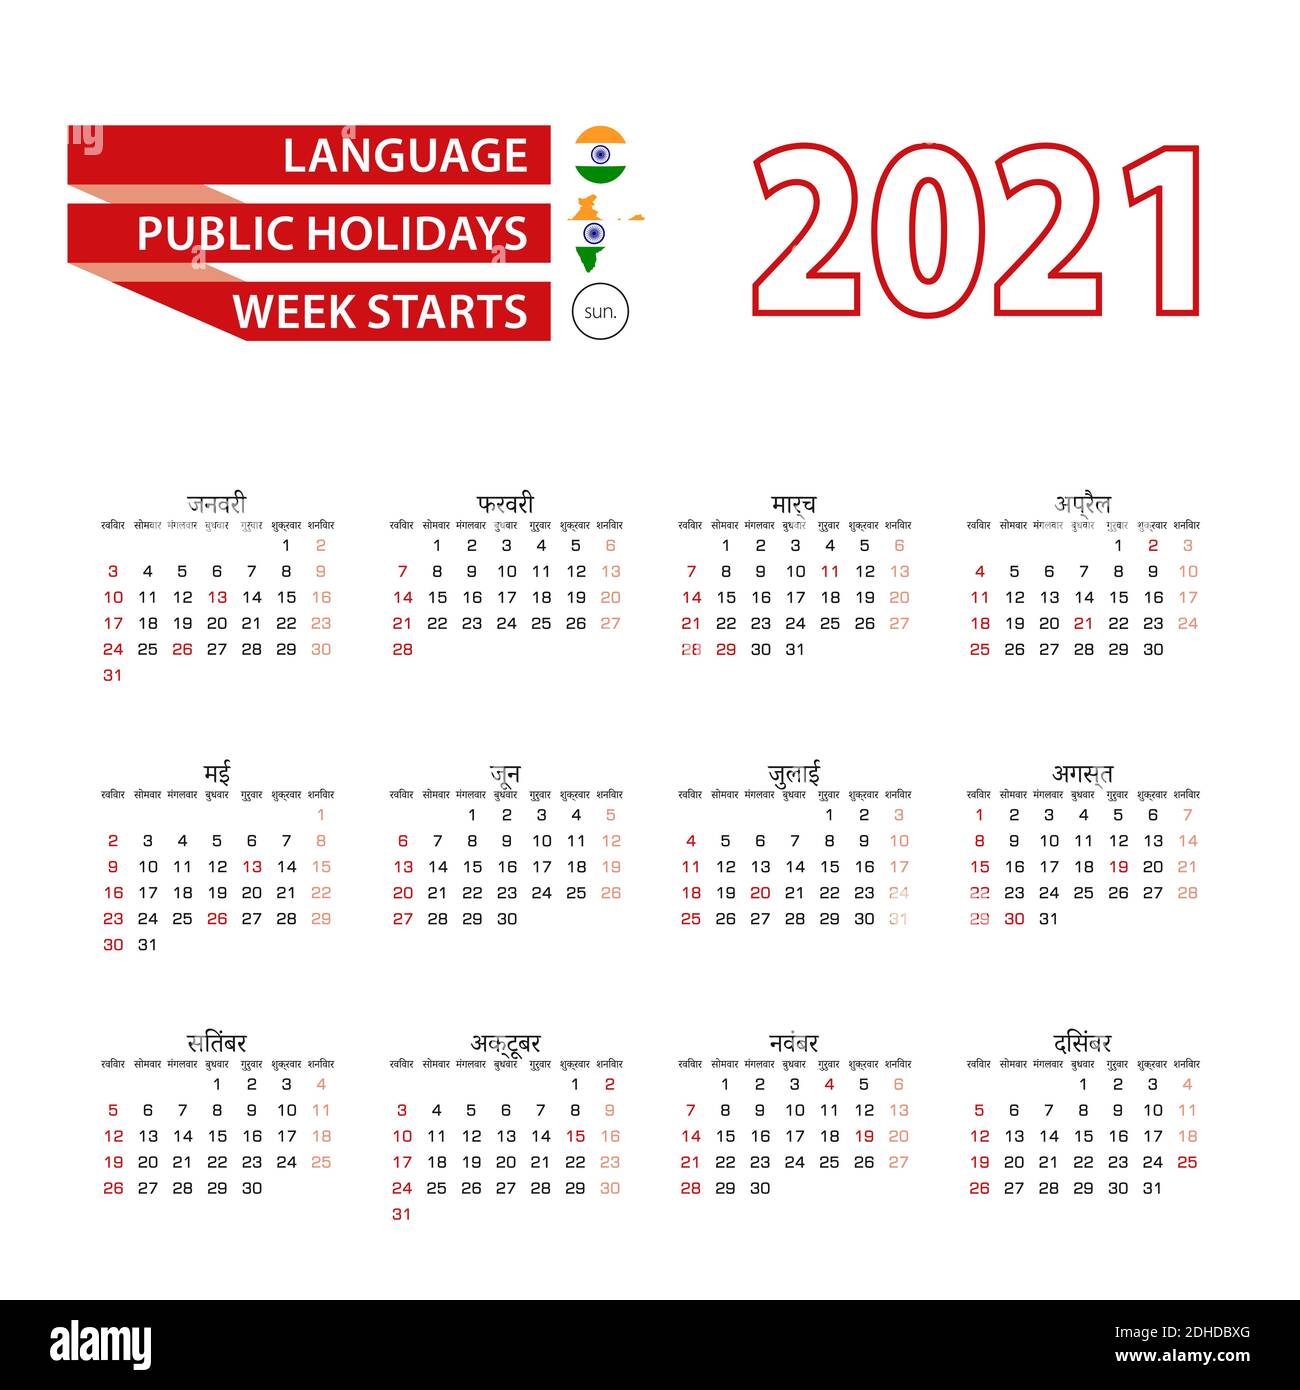 Calendar 2021 In Hindi Language With Public Holidays The Country Of India In Year 2021 Week Starts From Sunday Vector Illustration Stock Vector Image Art Alamy